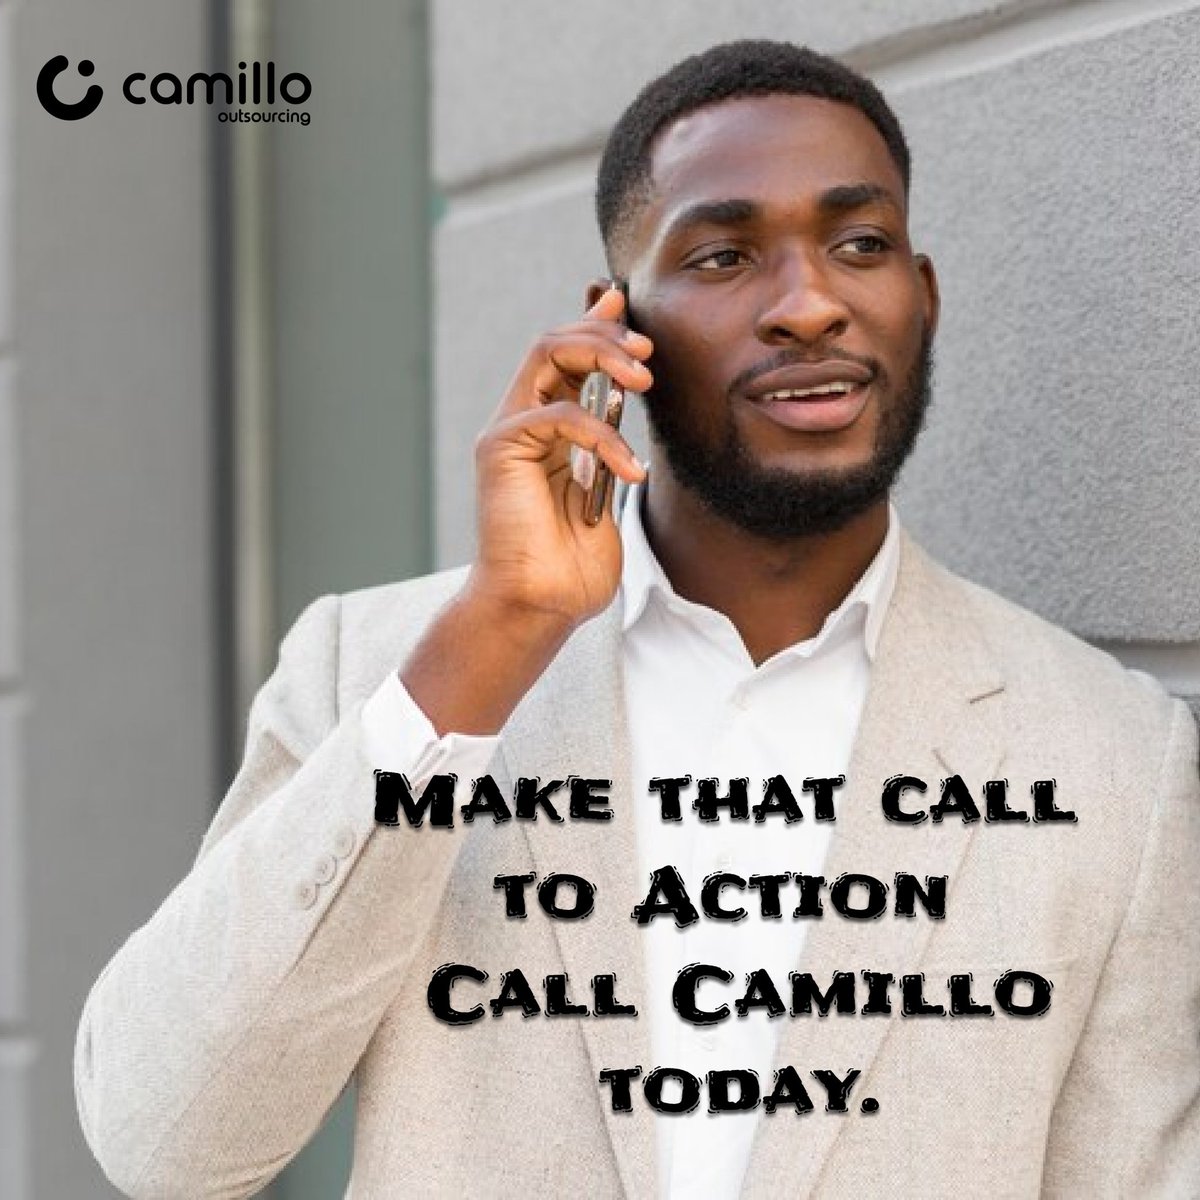 Enough of procrastinating your decision.

Make a call to action.

Outsource that other part of your work, Call Camillo today.

info@camillo.ng
0201-343-8060
0201-343-8061

#camillo #outsourcingpartner #businessowner
#businessprocess #calltoaction